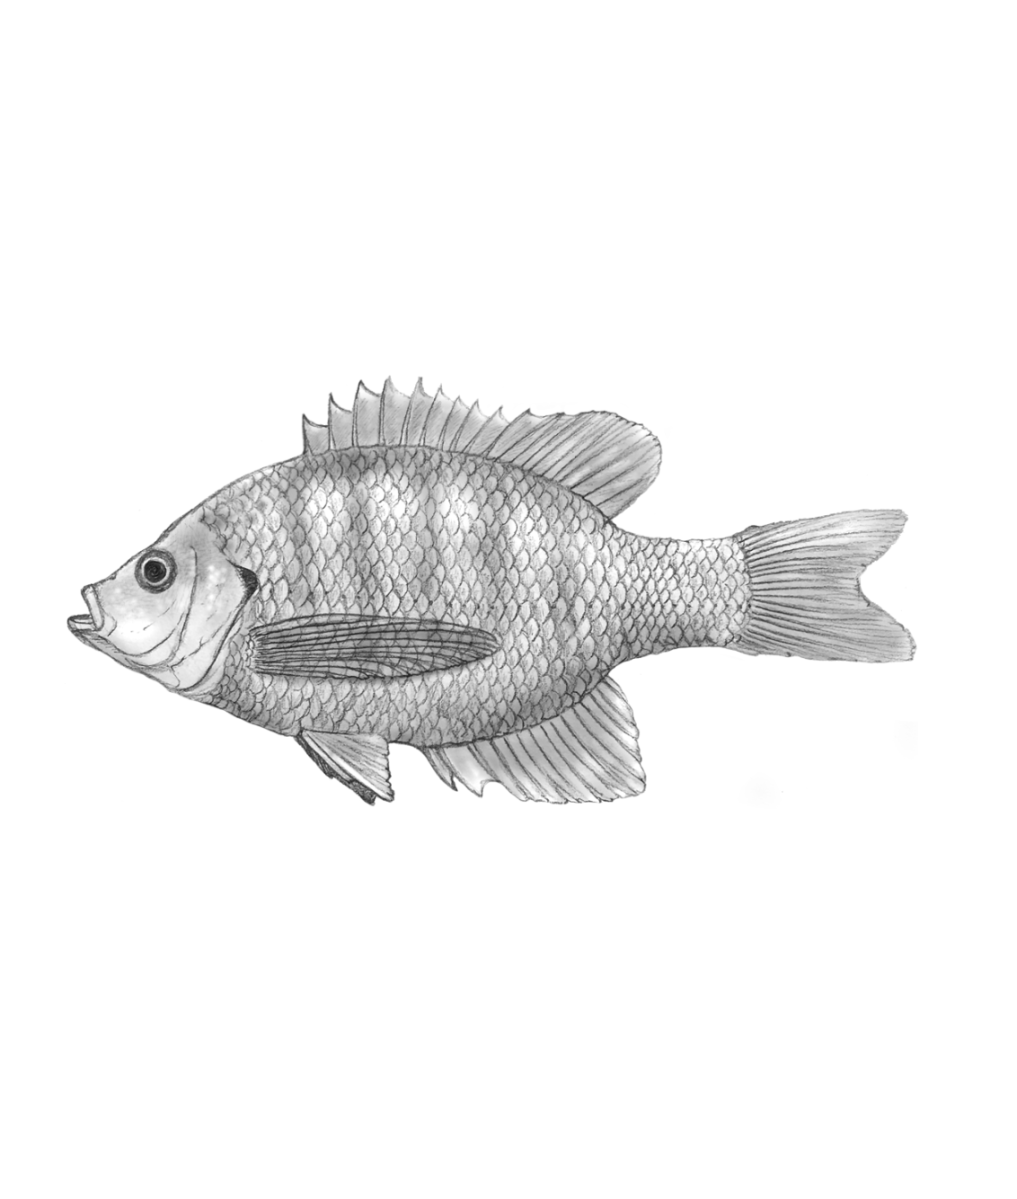 How to Draw a Fish: Fins and all – The Fisheries Blog